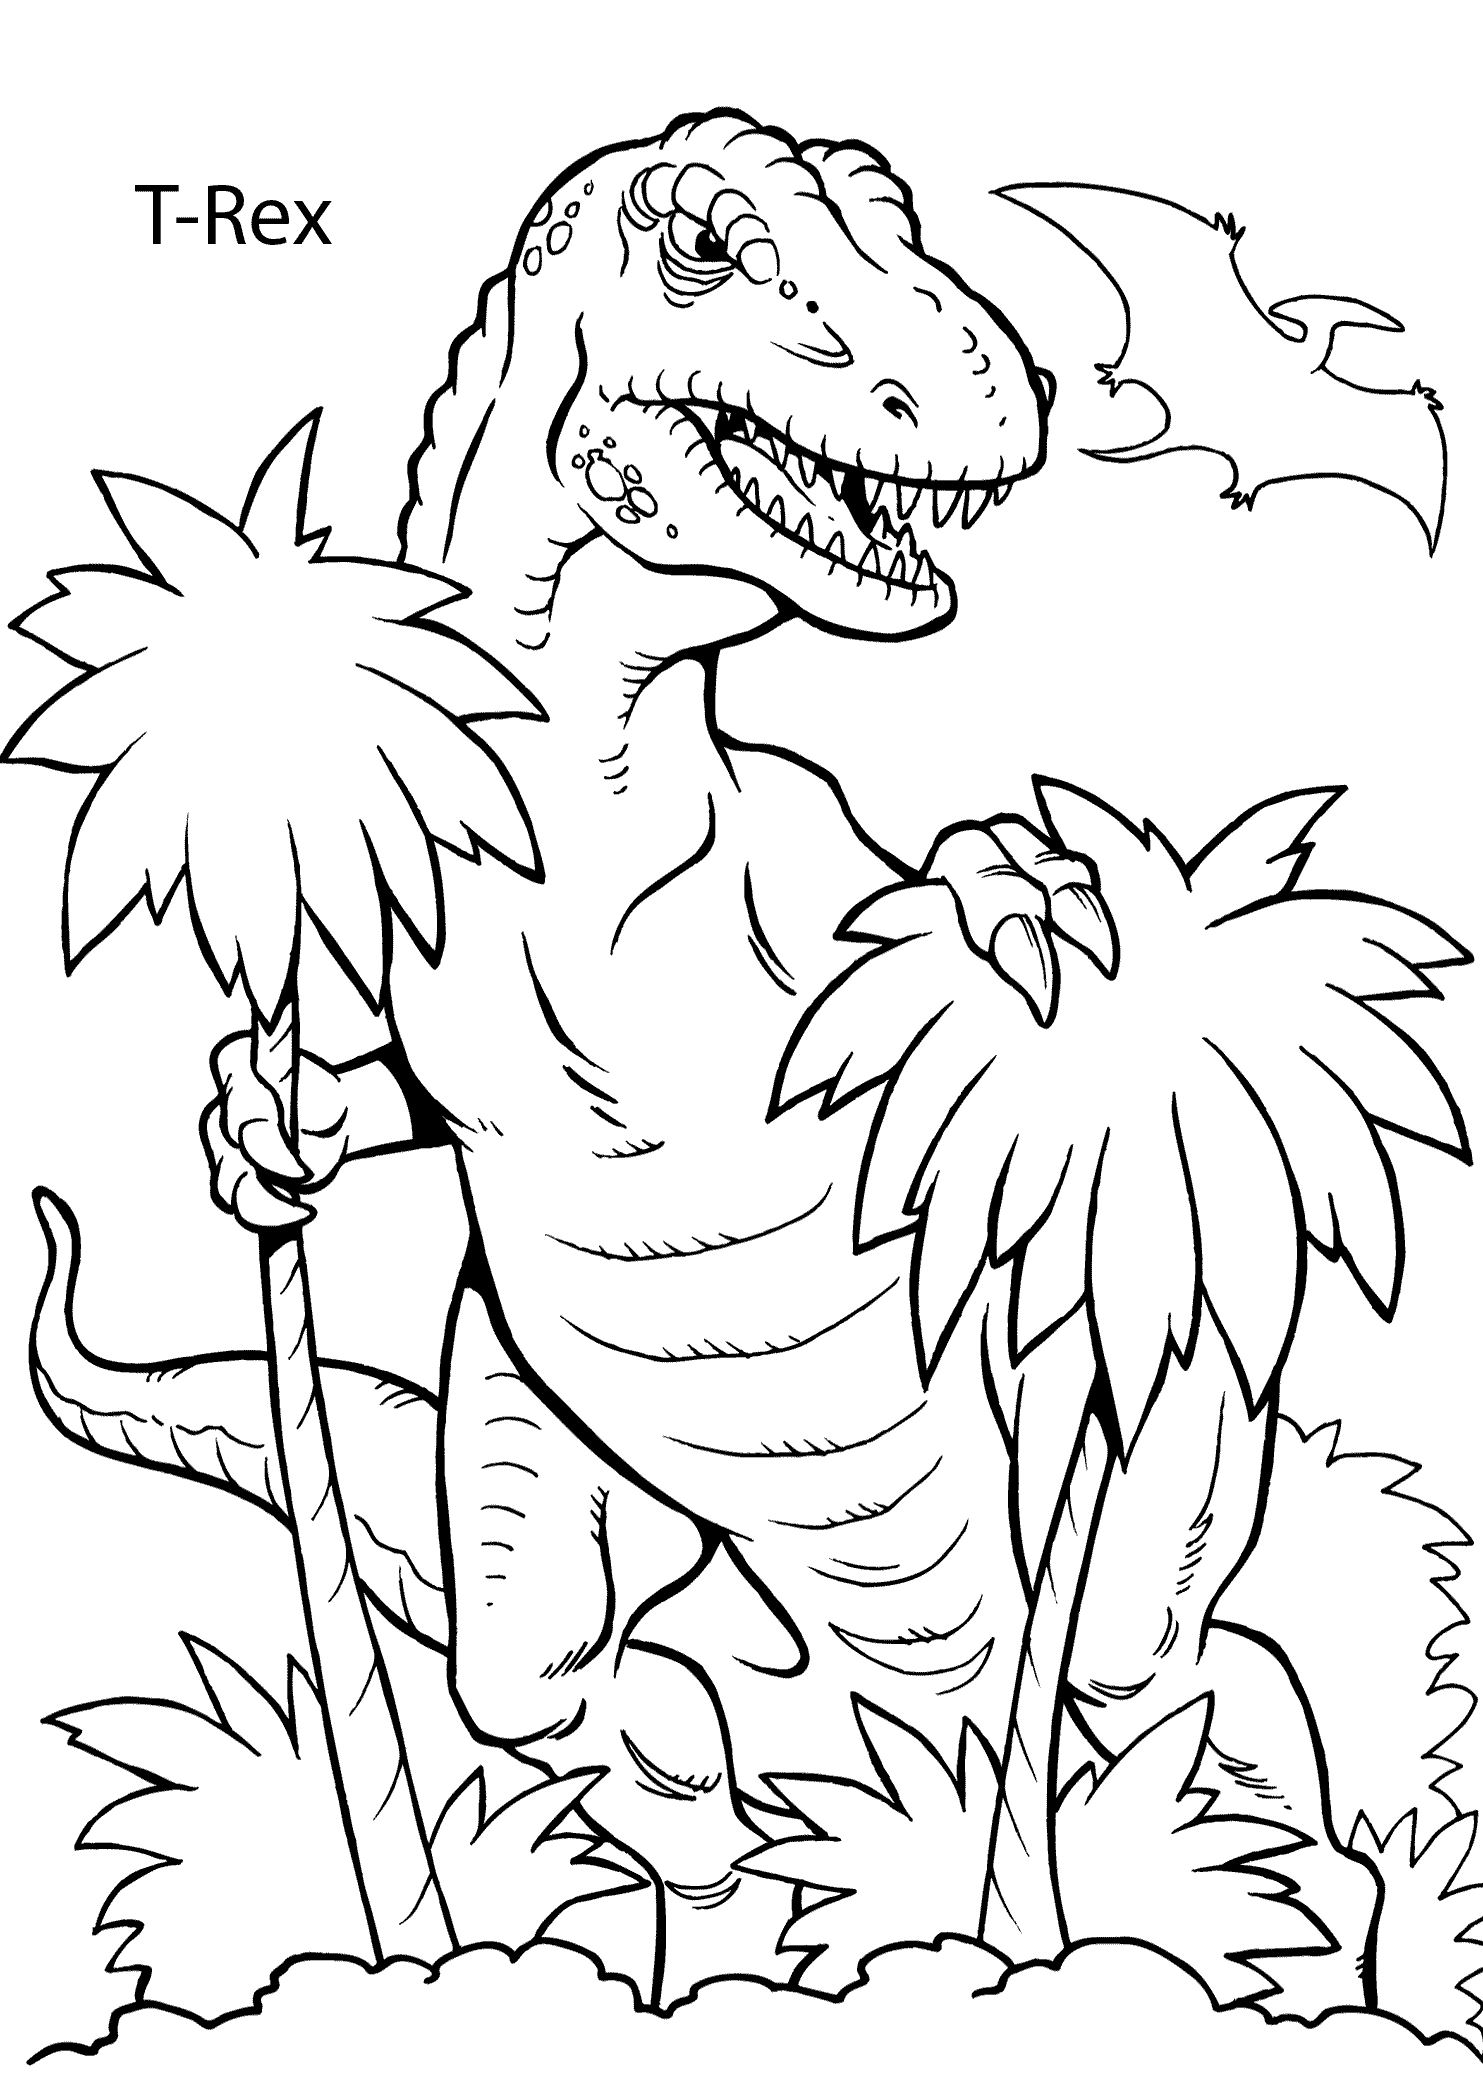 Dinosaur Coloring Pages Free